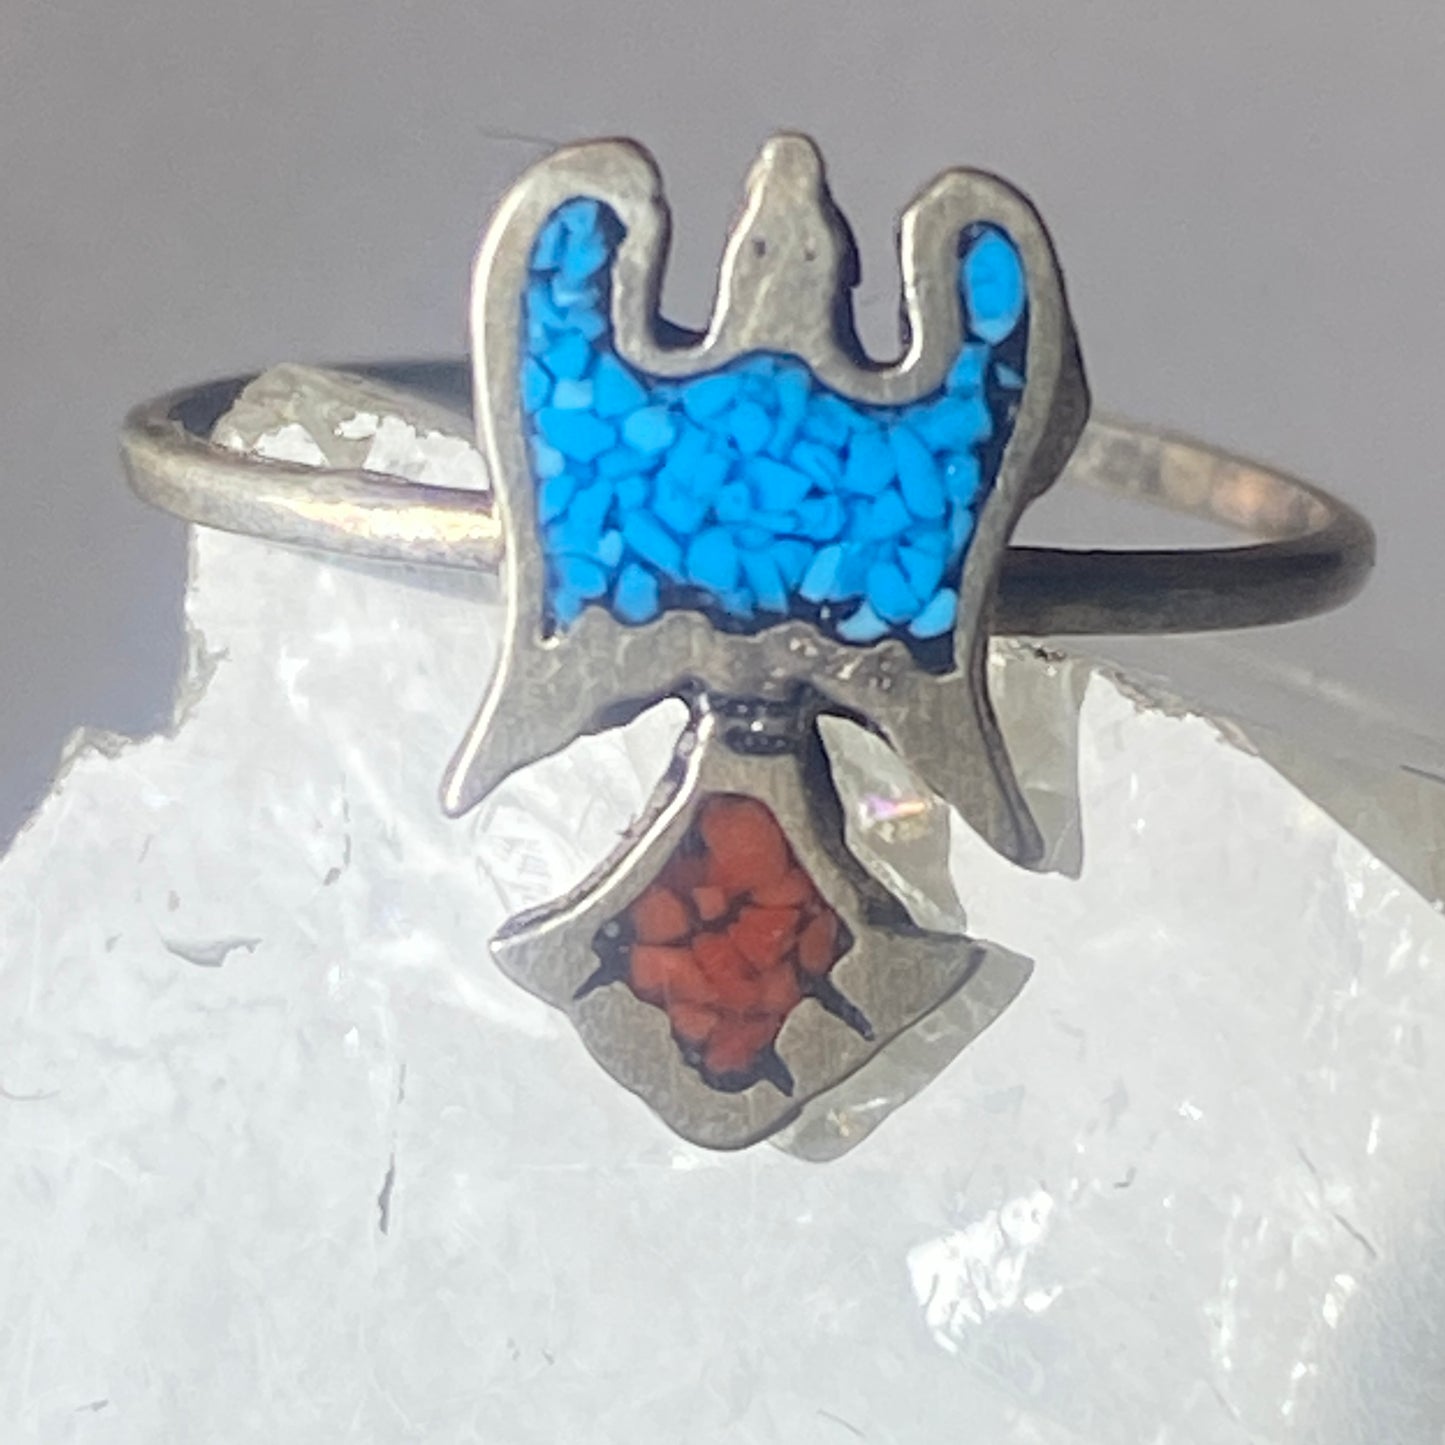 Phoenix ring turquoise coral chips southwest sterling silver women girls f